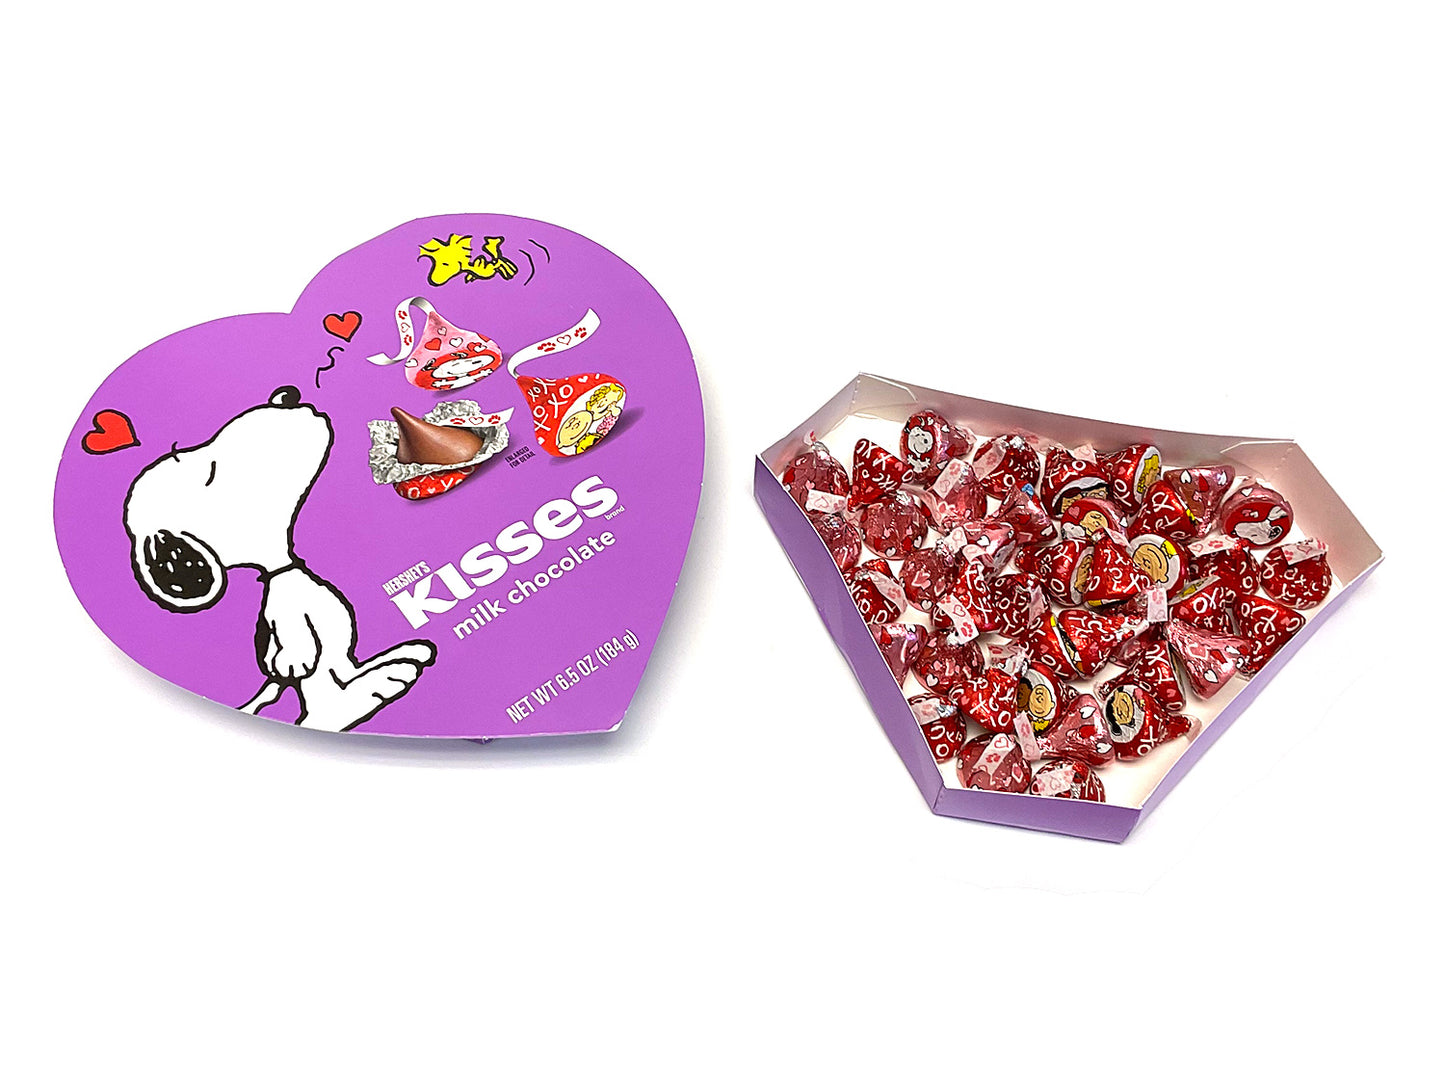 Hershey's Kisses Snoopy & Friends Gift Box - 6.5 oz - open